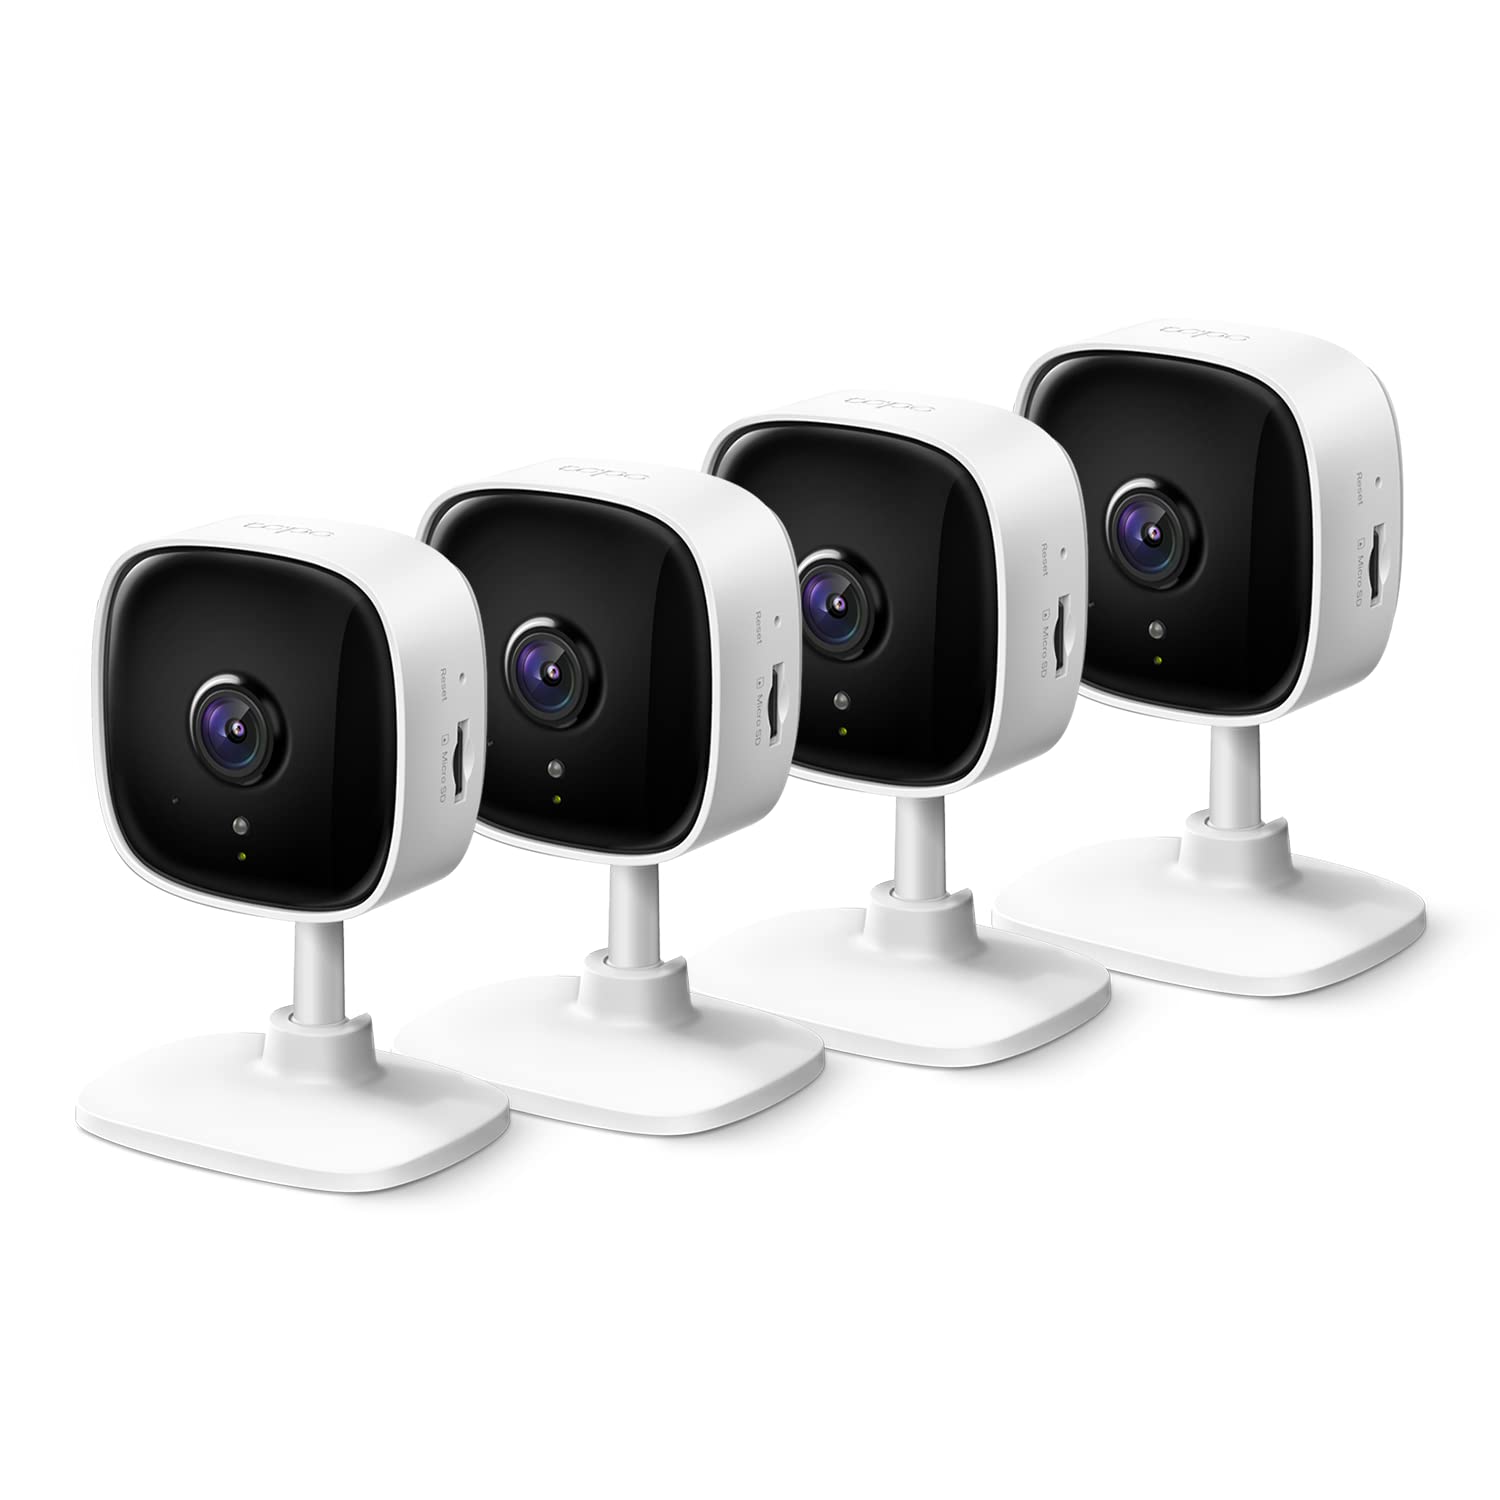 4-Pack TP-Link Tapo 2K C110 Security Camera $74.99 ($18.75 each)